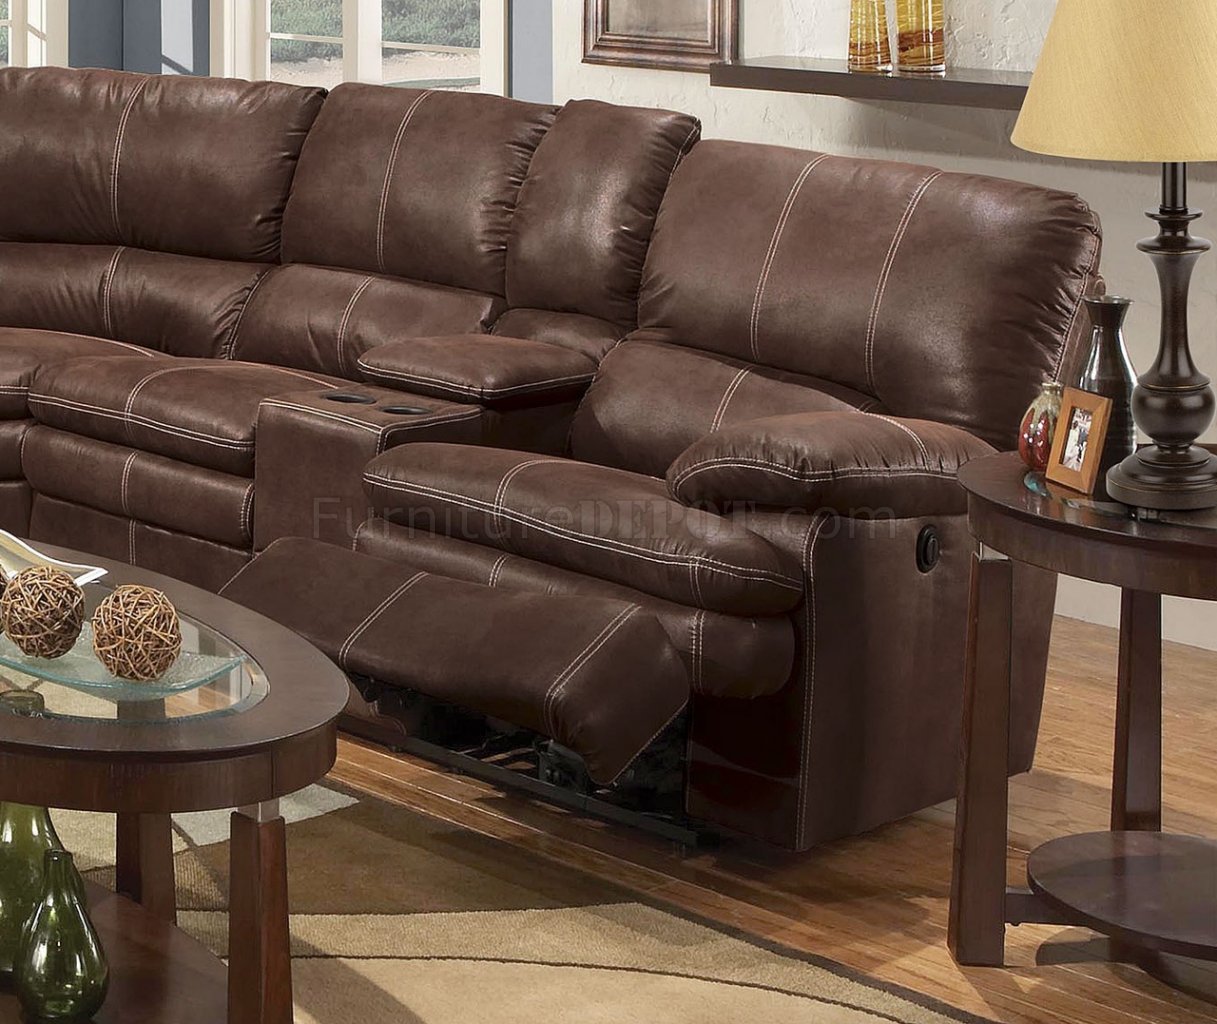 Rustic Brown Microfiber Reclining, Rustic Brown Leather Sectional